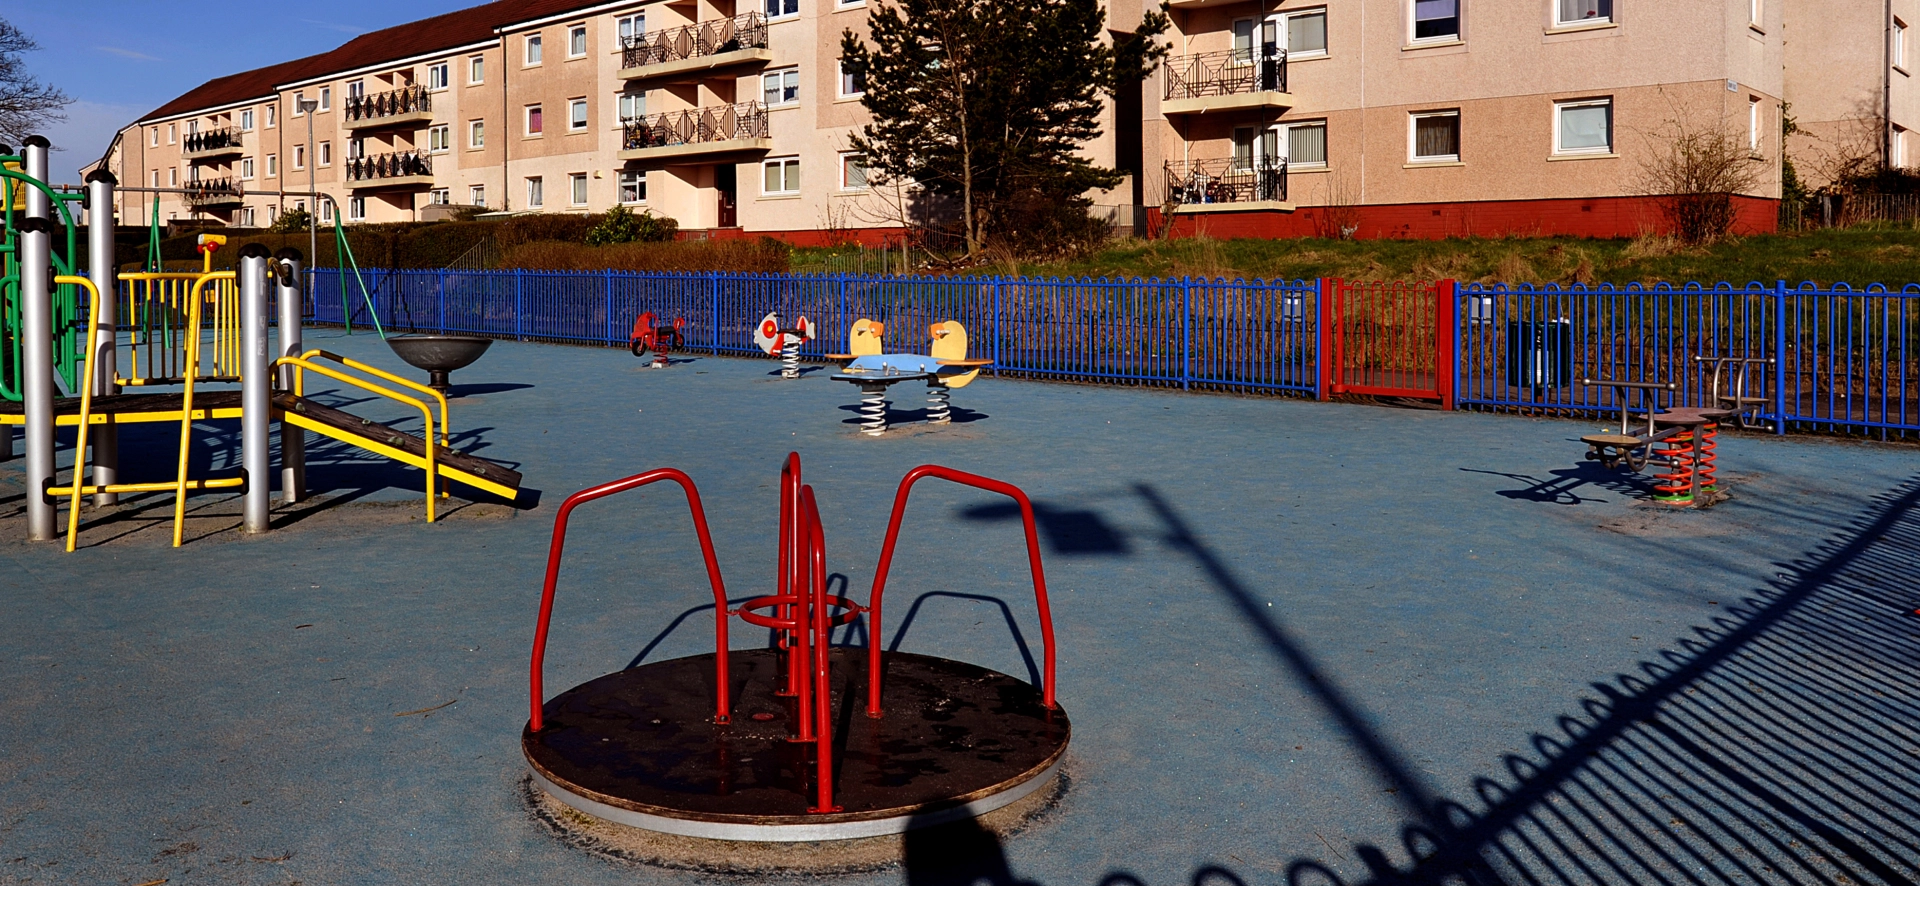 A playground in Drumchapel with buildings in the background.